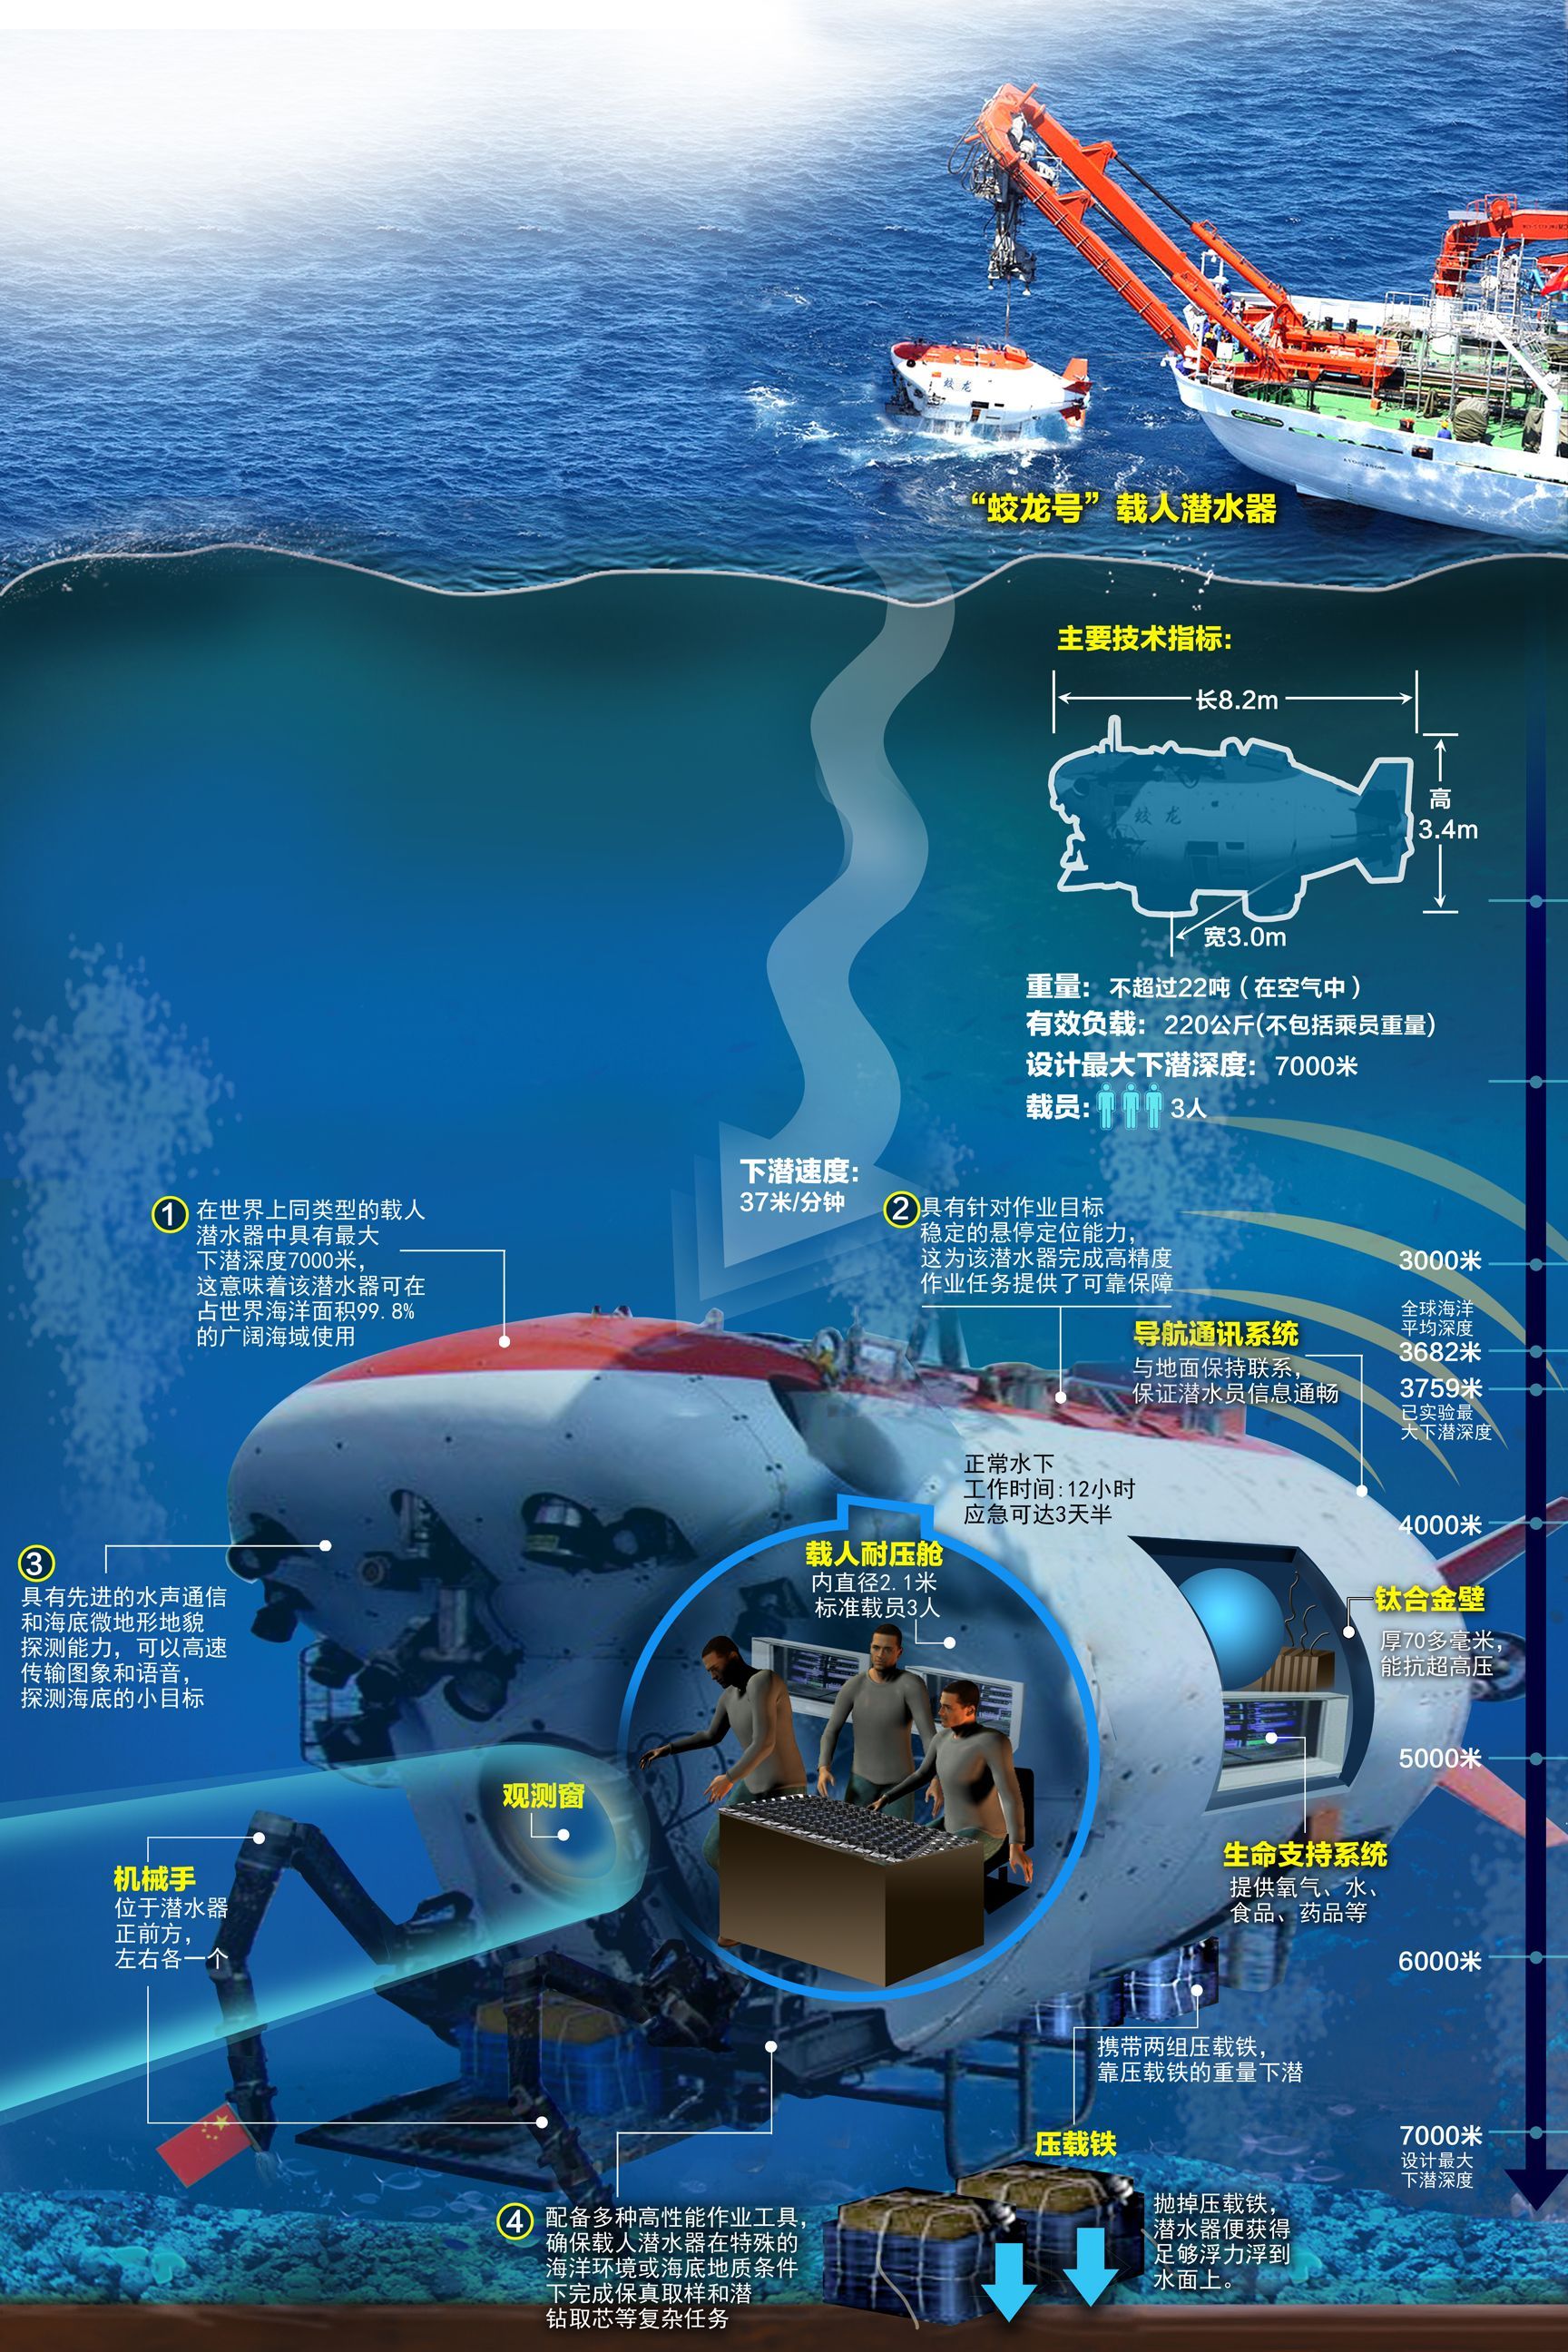 China Made Manned Submersible Reaches 965 Meters In The Mariana Trench. Marianas Trench, Oceans Of The World, Submersible